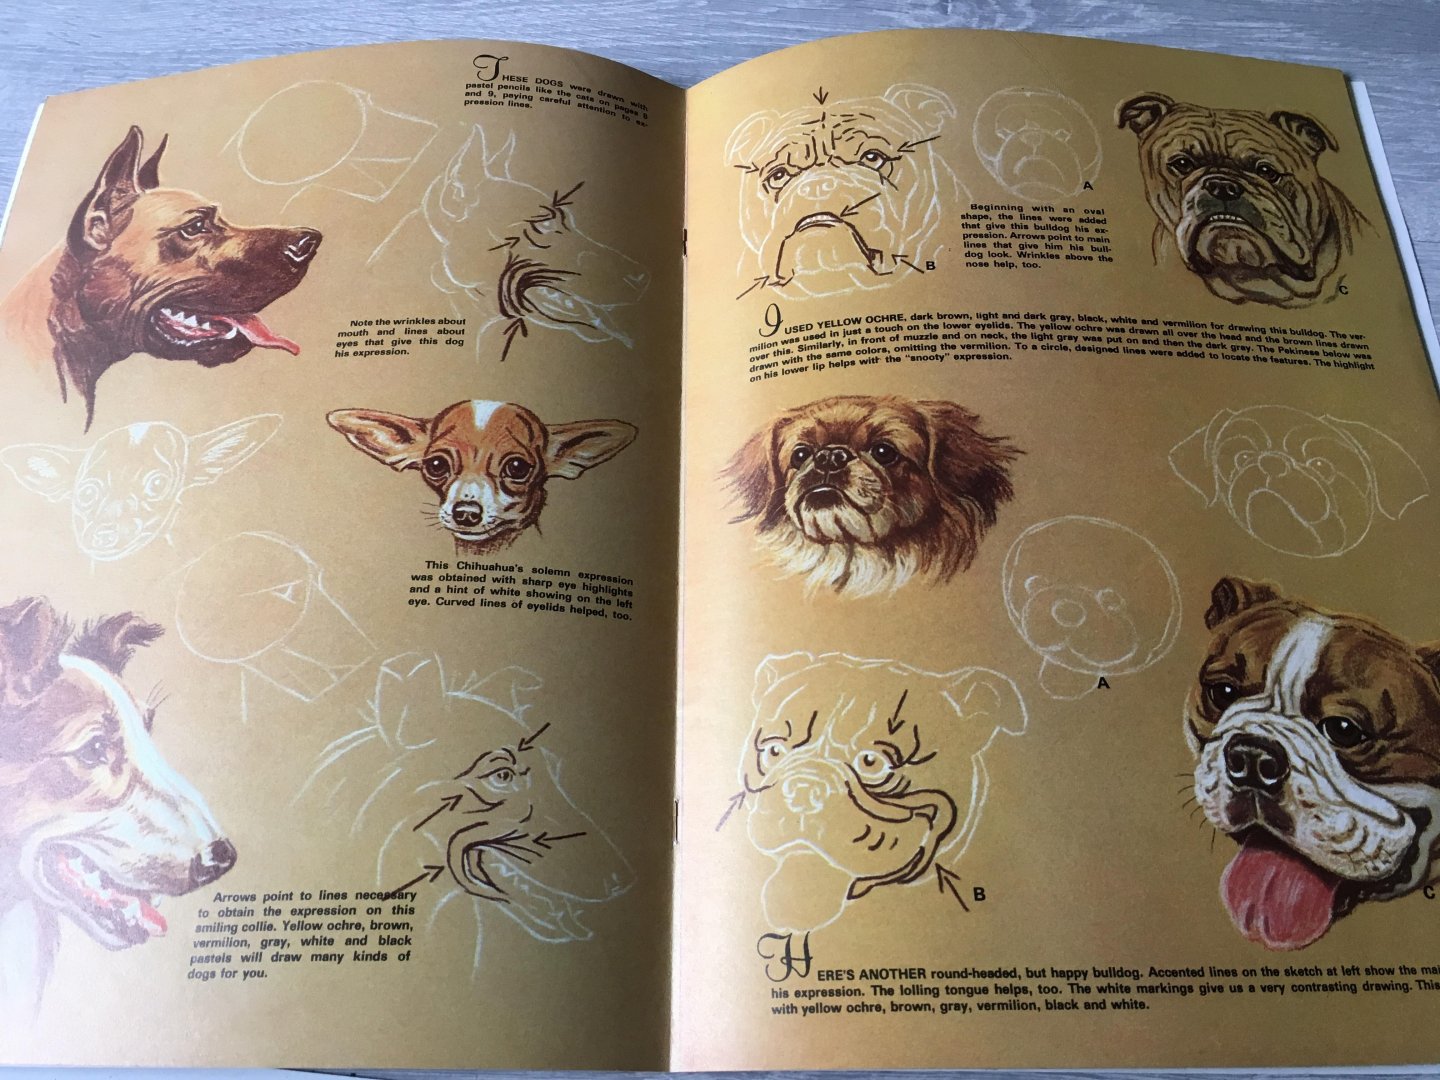 Walter J. Wilwerding - How to draw and paint animal expressions